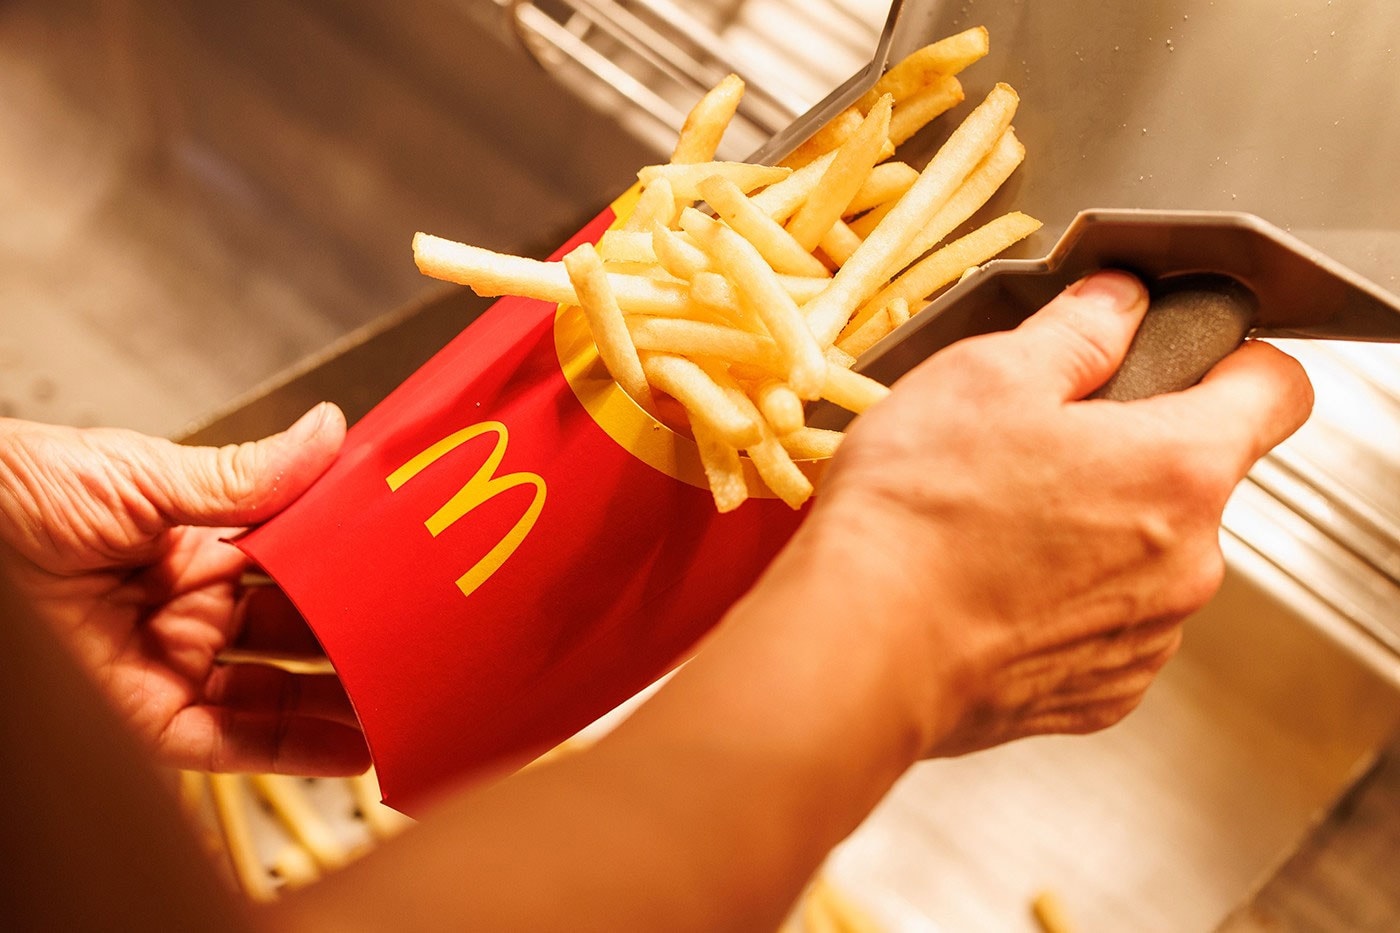 McDonald's Japan Return Large Medium-sized French Fries global supply chain issue fas food golden arches shock 